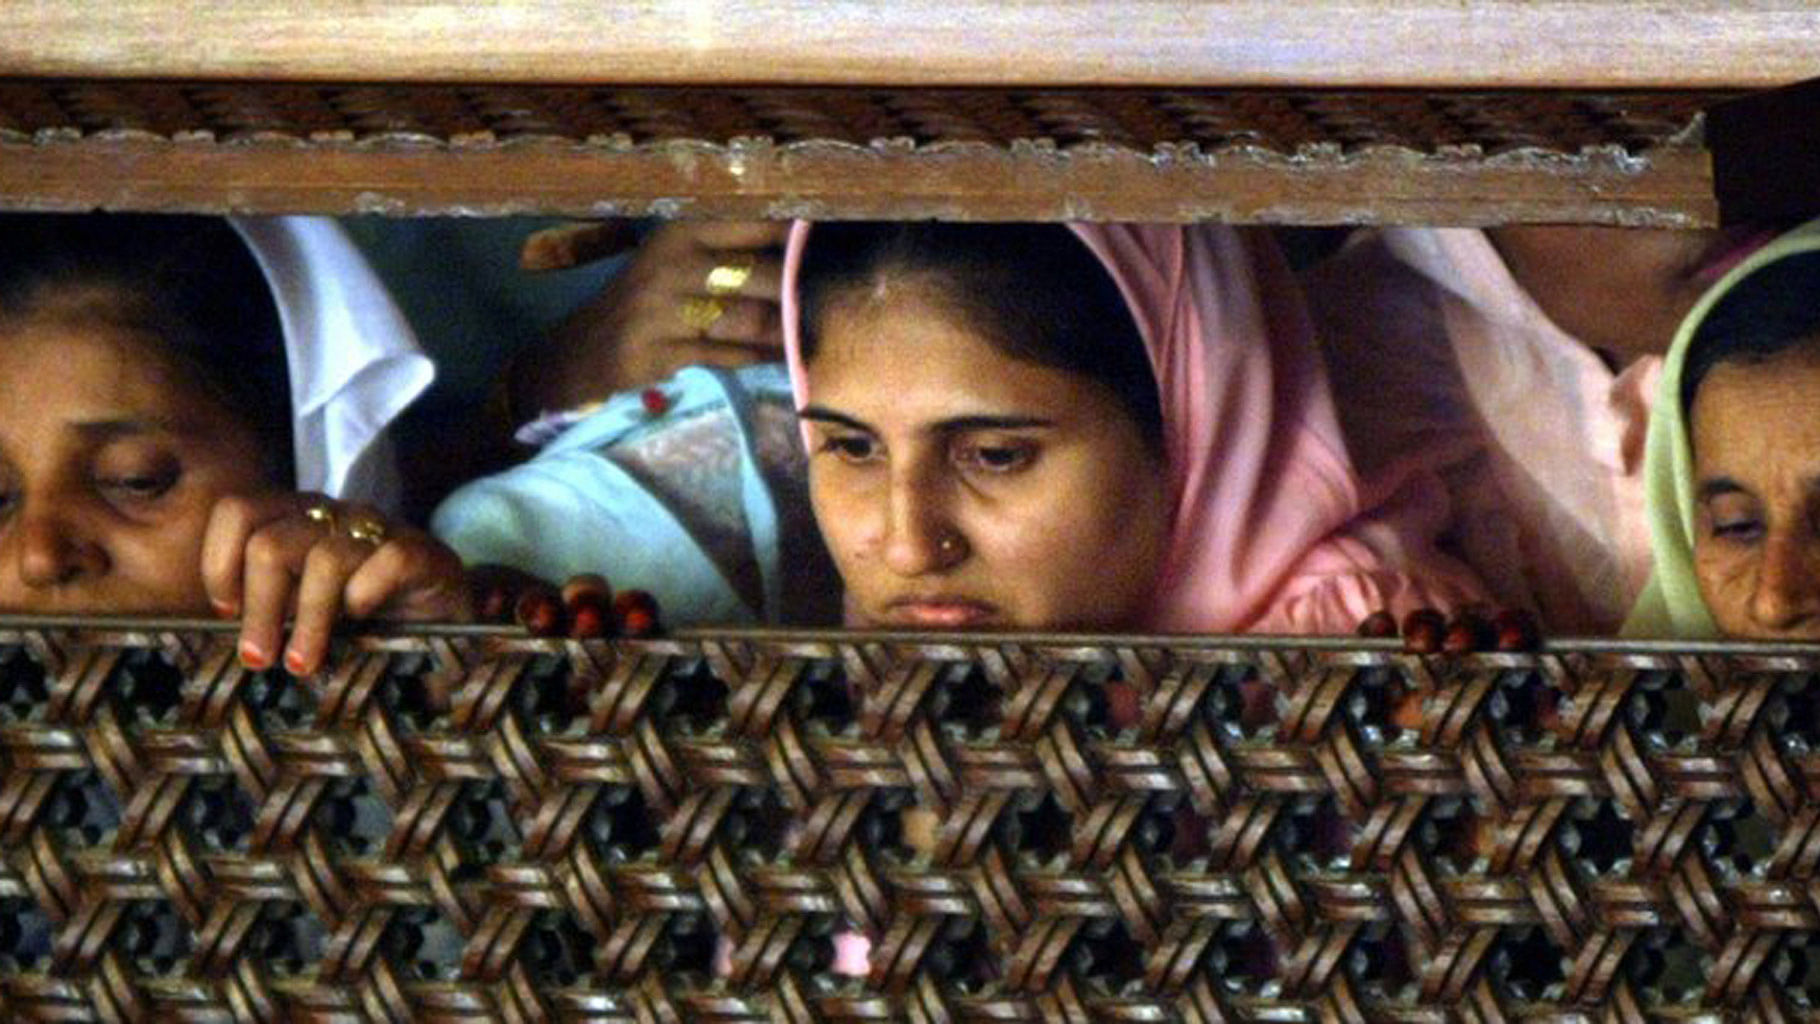 File picture of Muslim women. (File photo: Reuters)